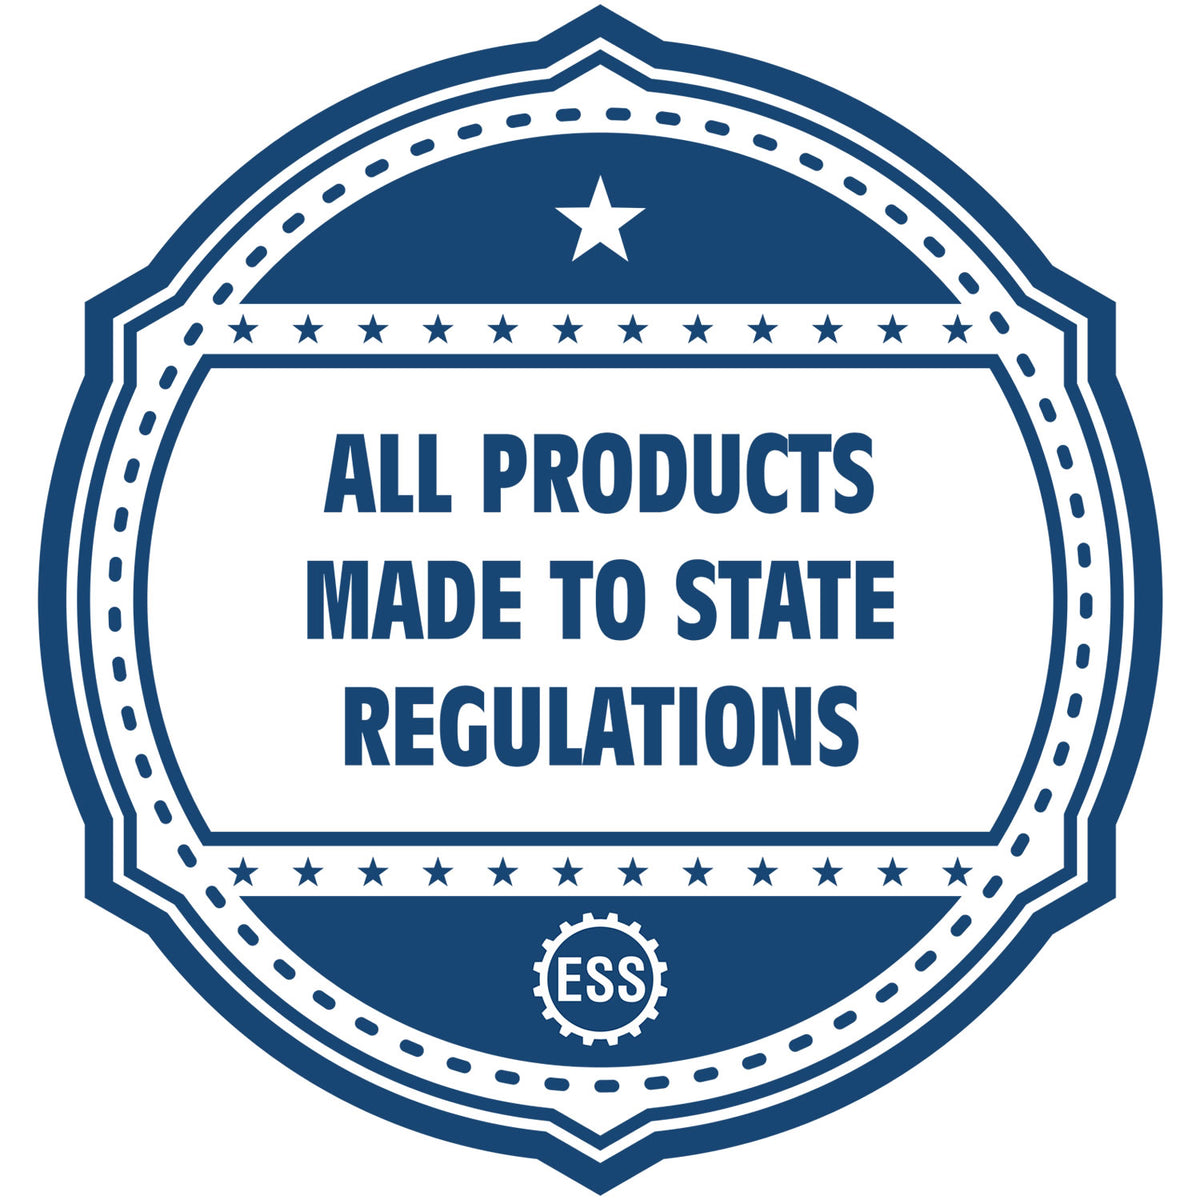 An icon or badge element for the Slim Pre-Inked Iowa Architect Seal Stamp showing that this product is made in compliance with state regulations.